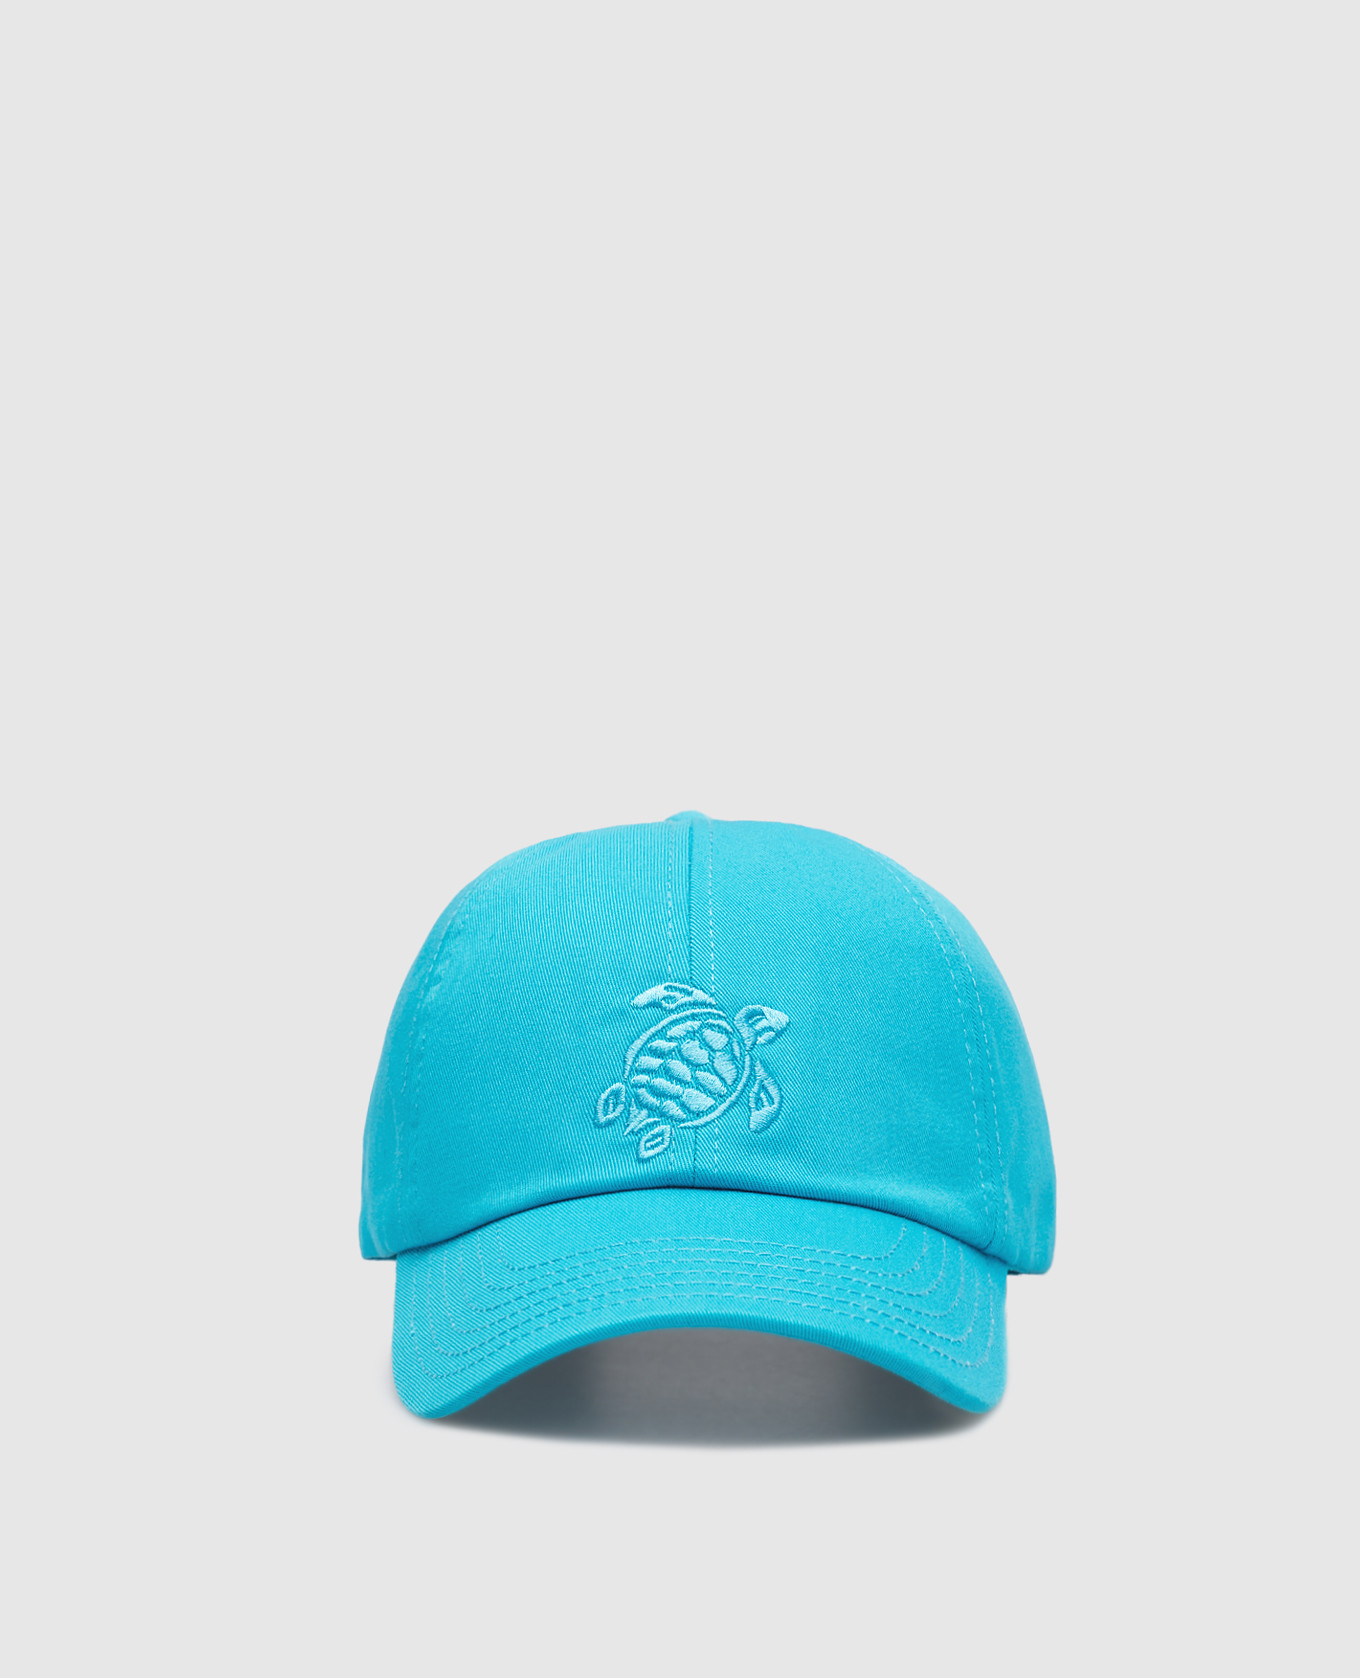 Capsun blue cap with logo embroidery